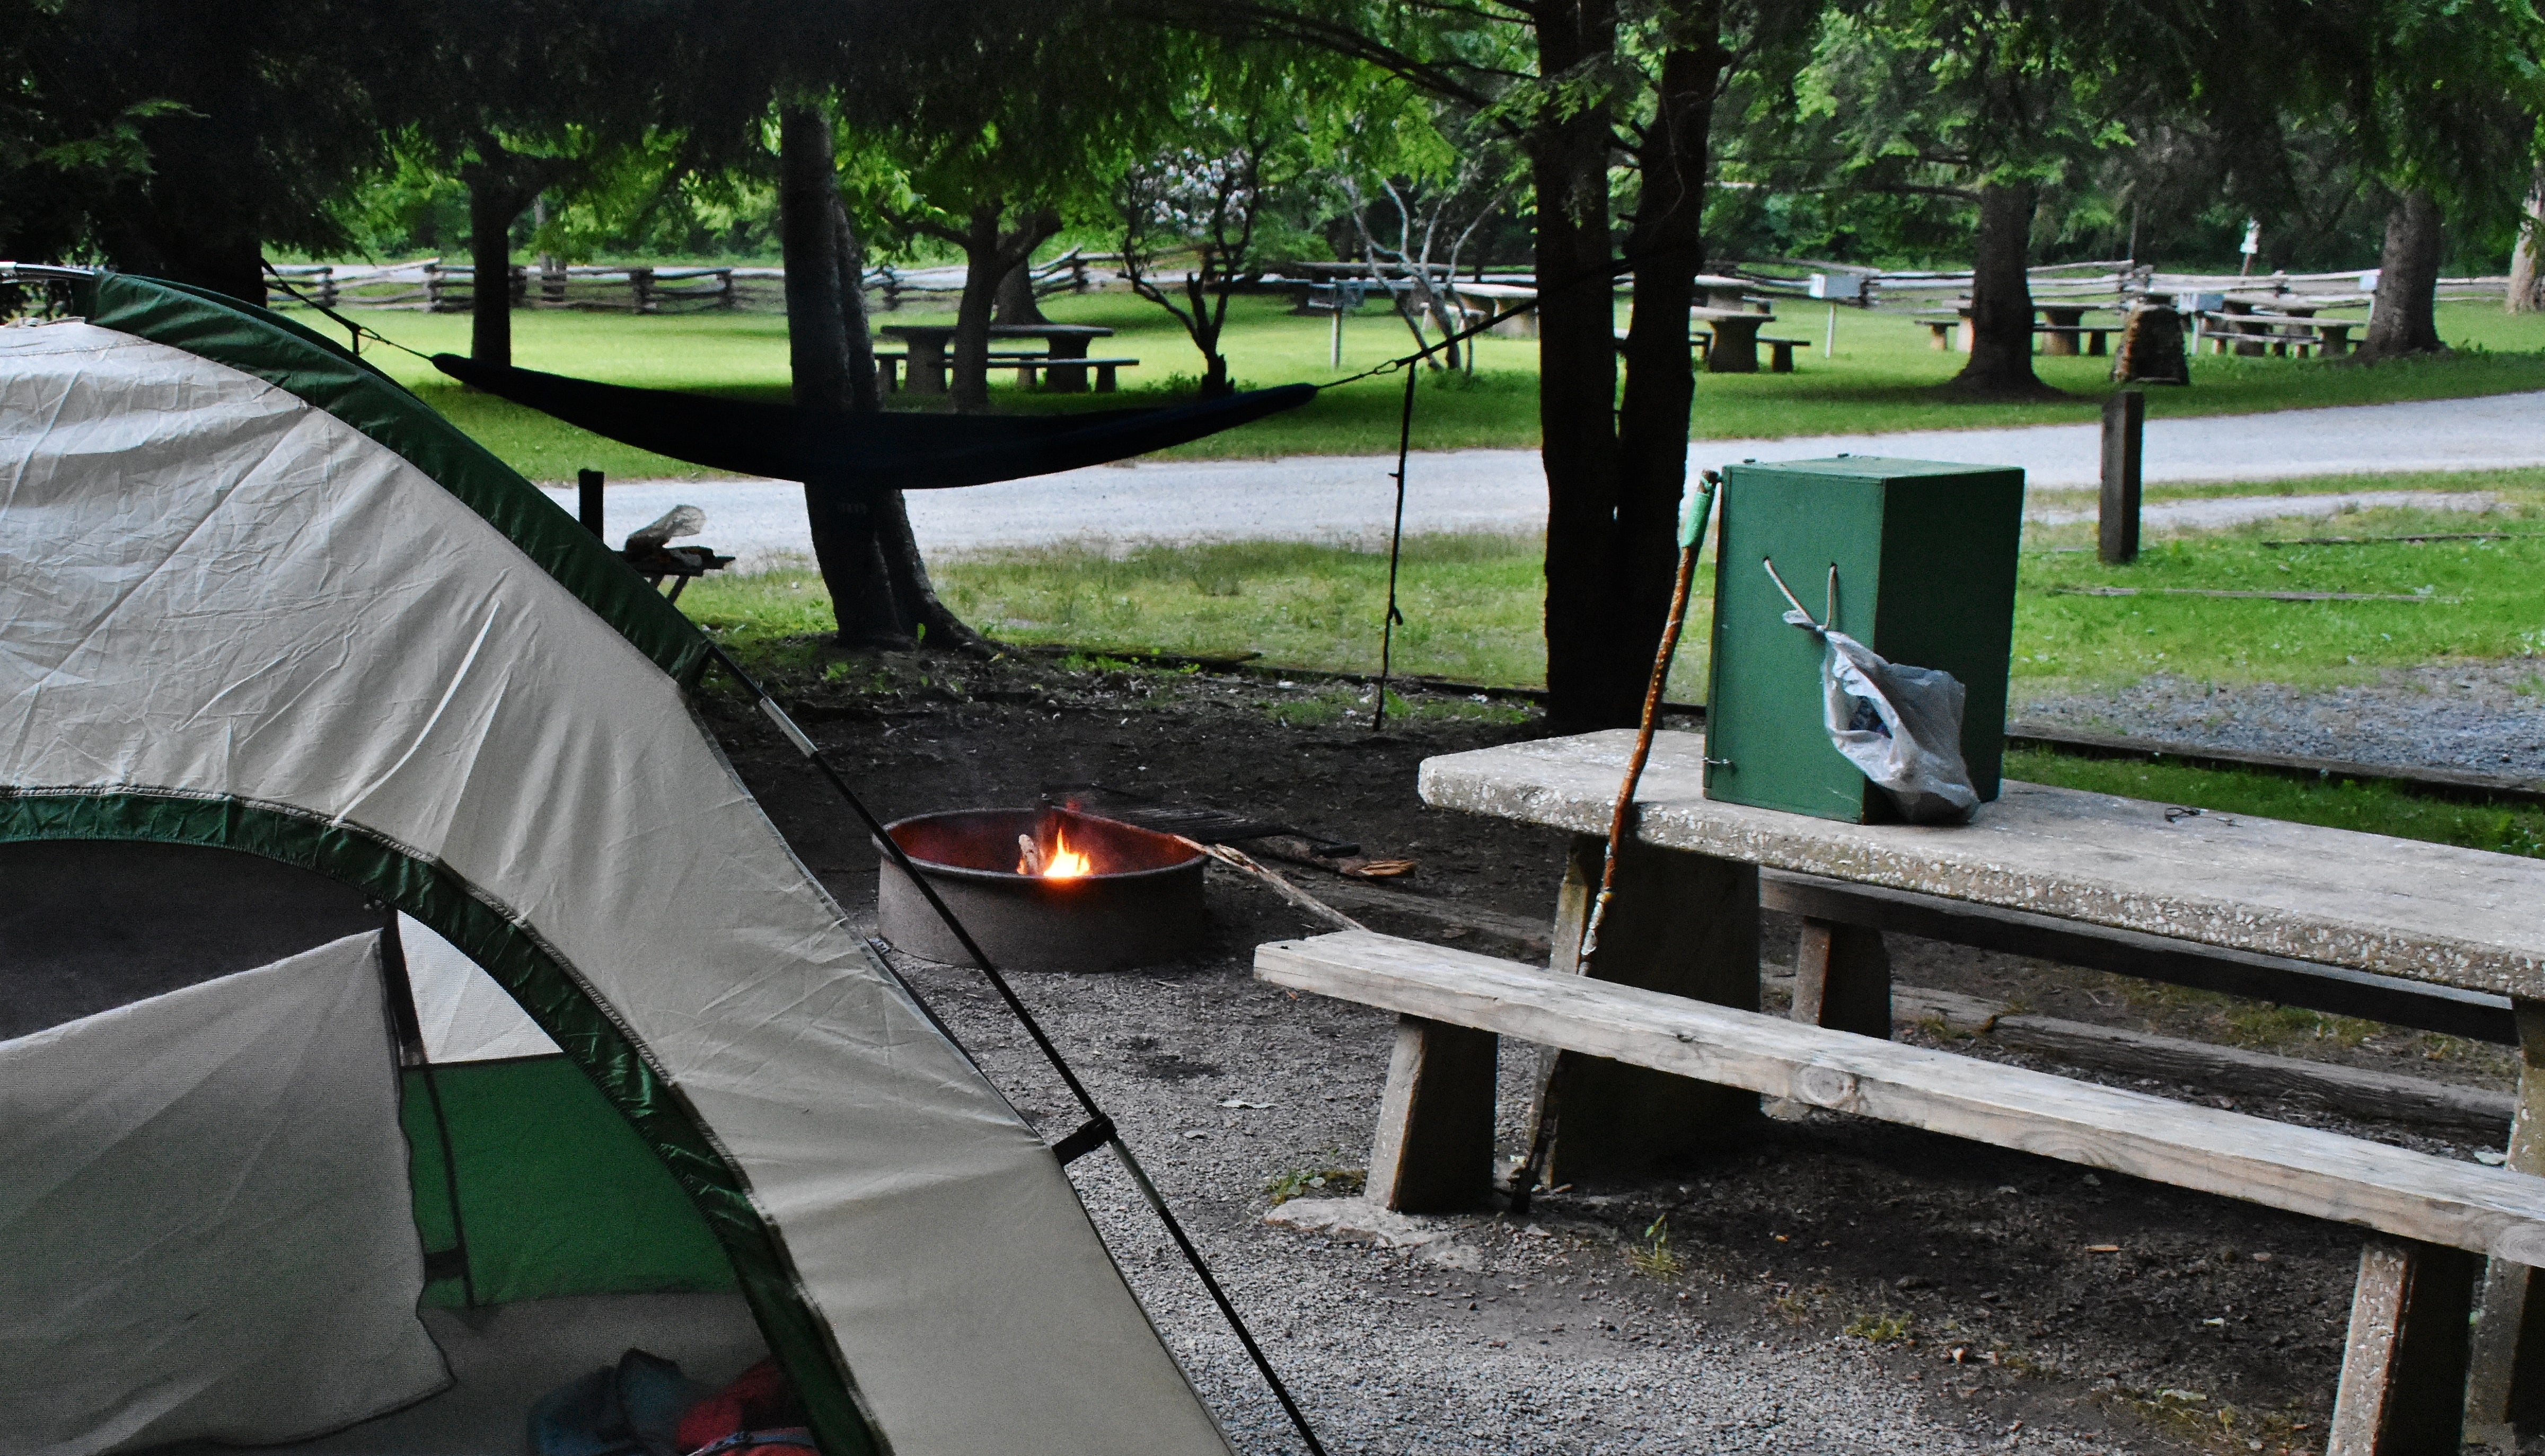 There is a large picnic area in addition to the campsites.